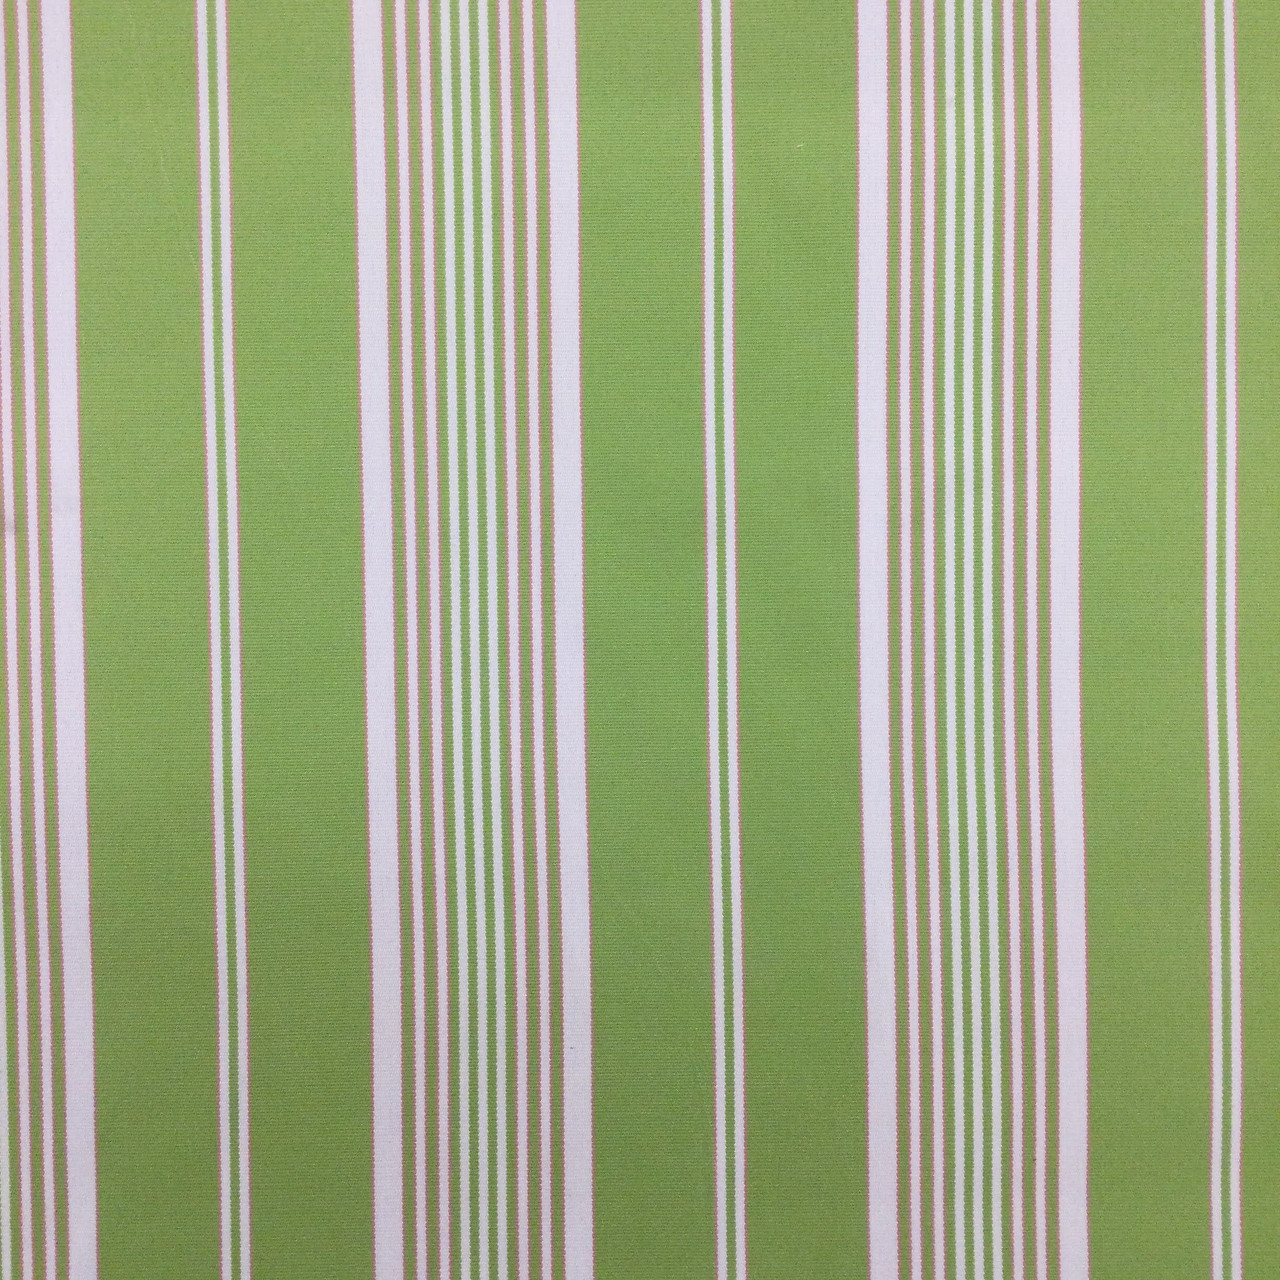 Linden Hill Green Stripe Fabric |. High UV | 100% Polyester | Outdoor Patio  Upholstery